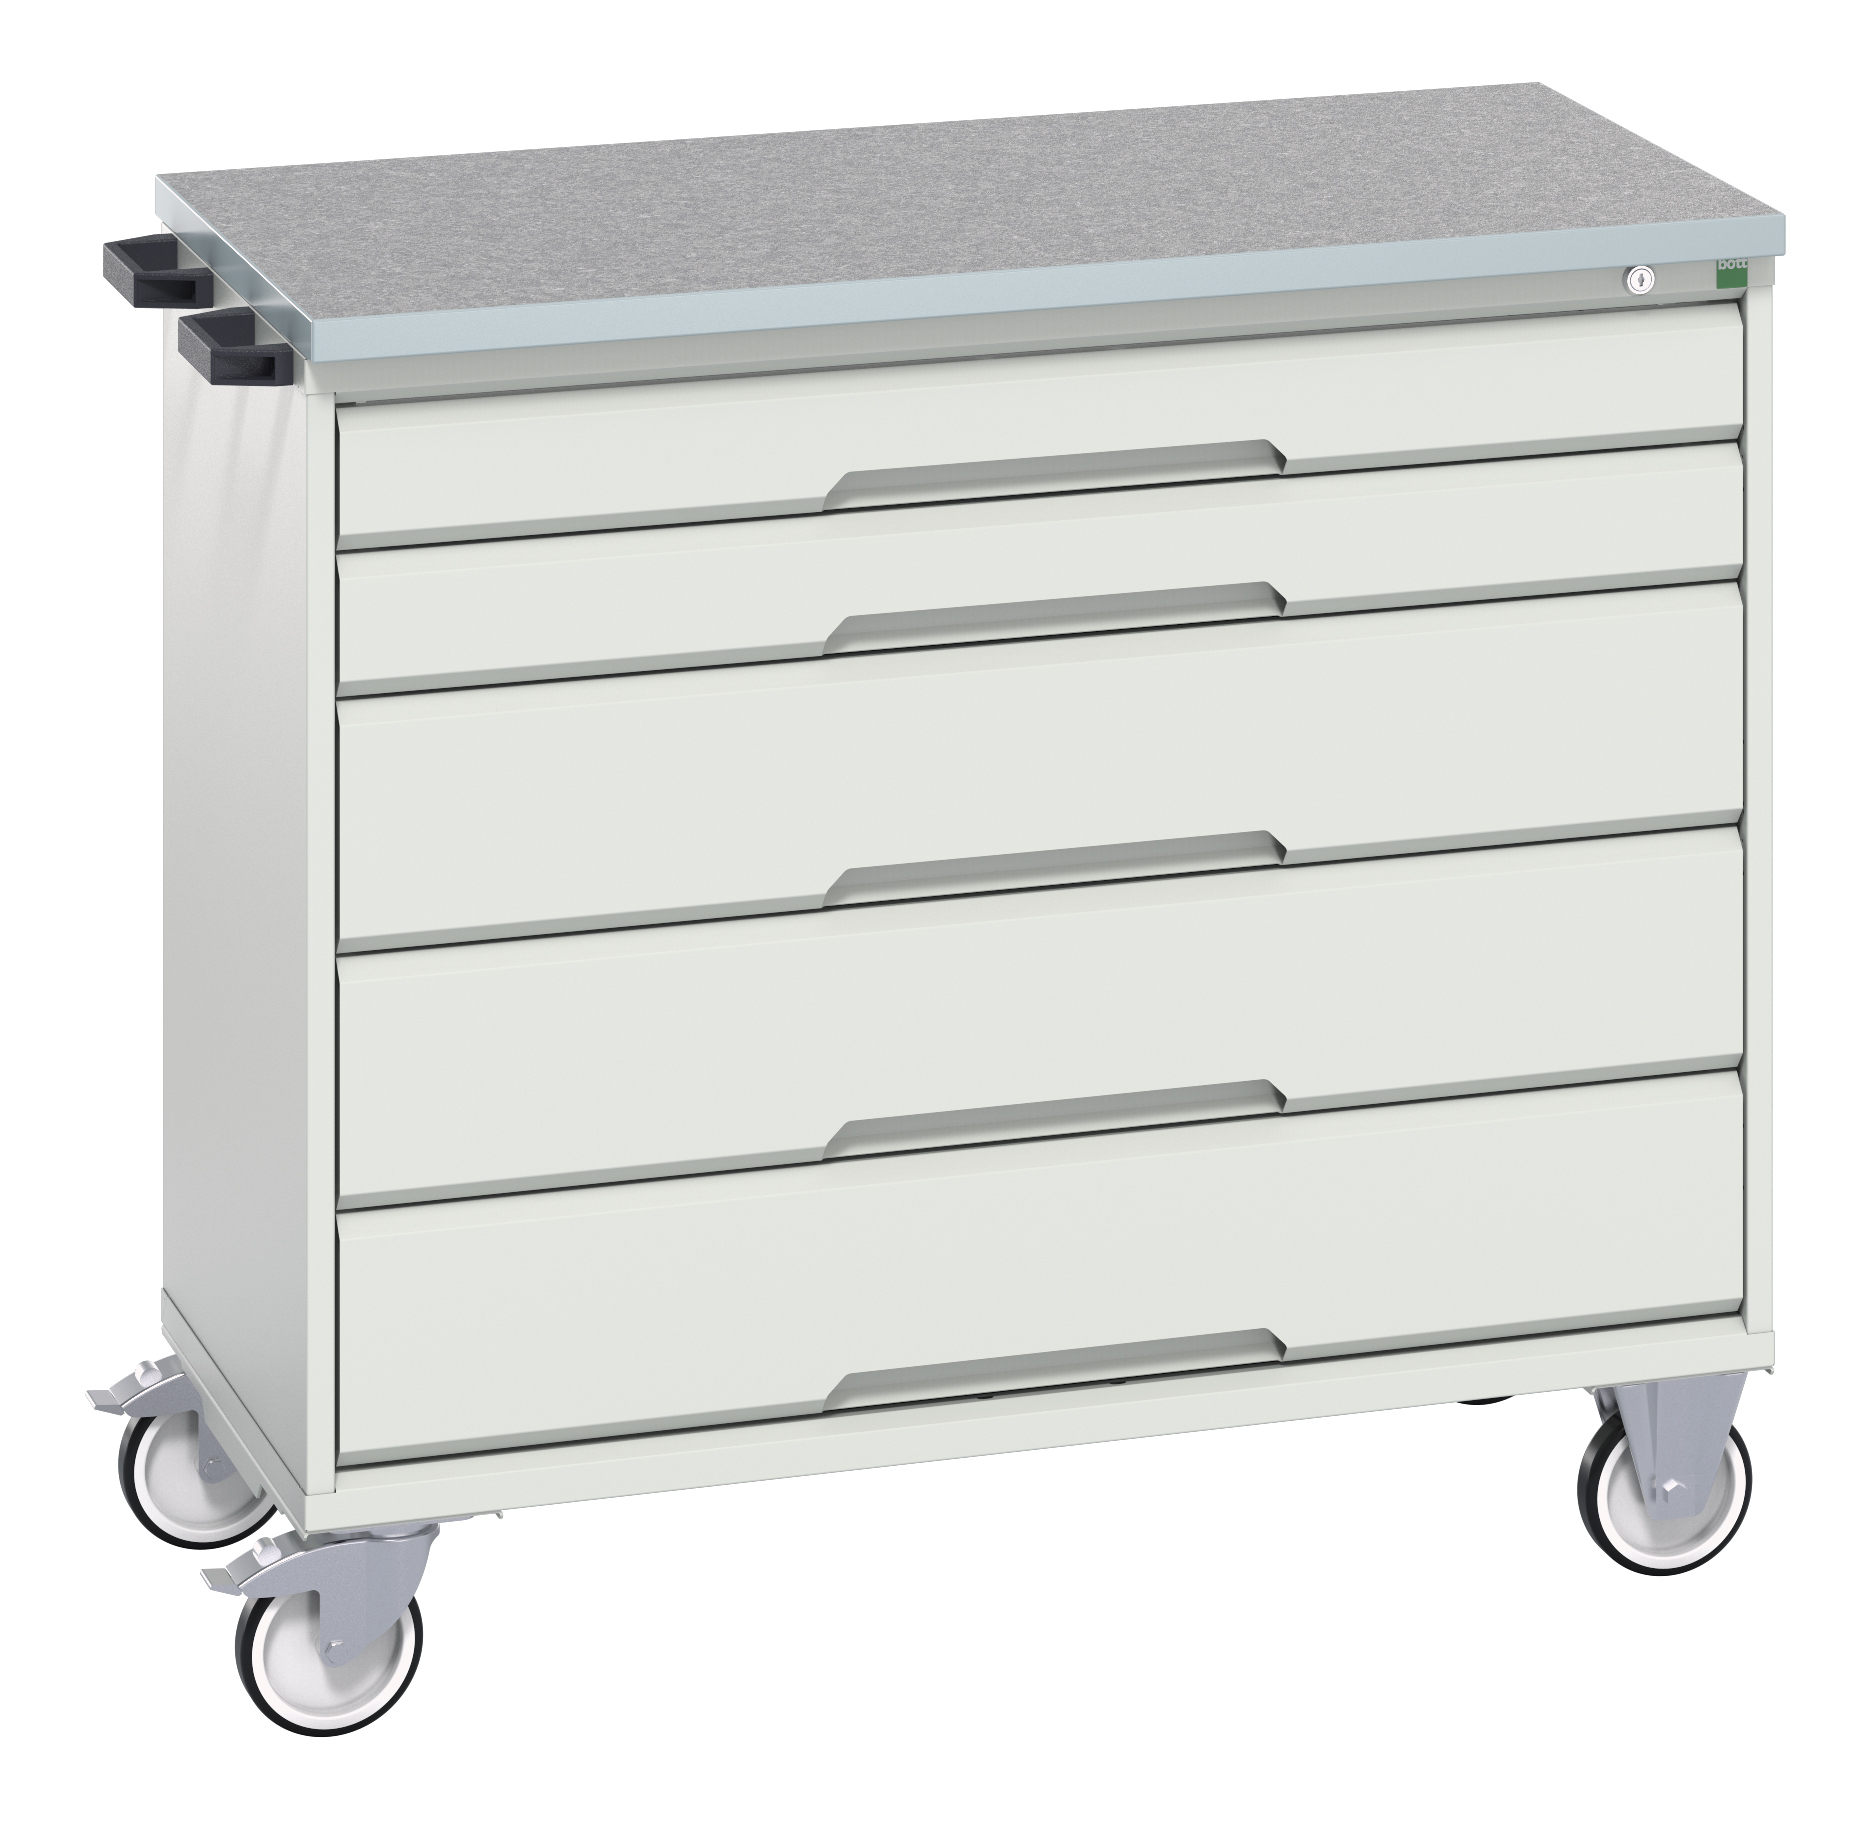 Bott Verso Mobile Drawer Cabinet With 5 Drawers & Lino Top - 16927050.16